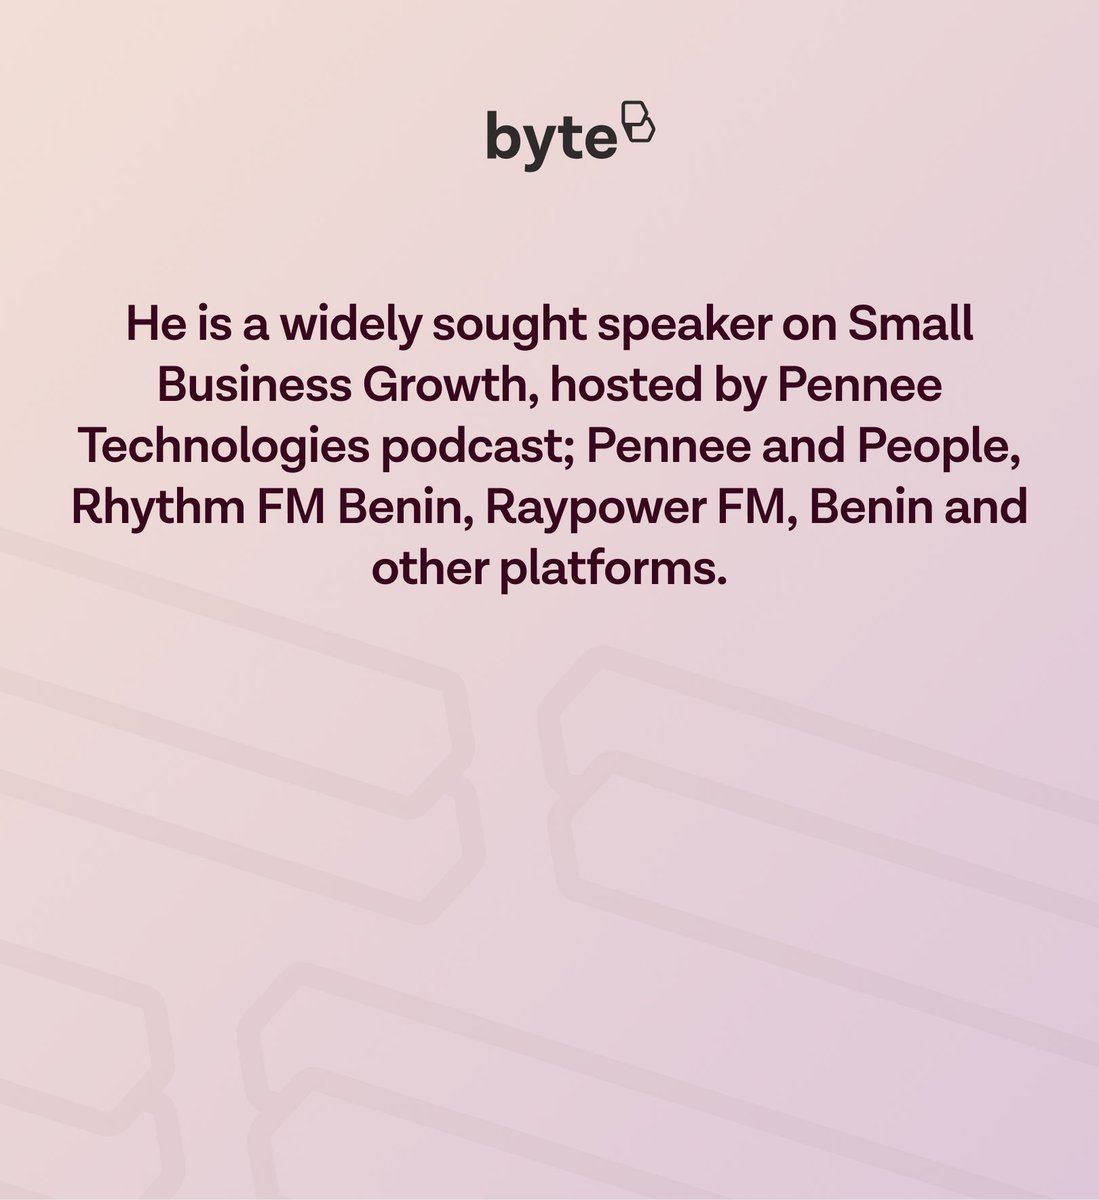 Meet @InnocentKenO a Microbiologist now playing in the interior decoration and design space. 

He is the Director of Business Operations at @KenearthPartner where he leads the transformation of living spaces into luxurious wonder.

#joinbyte #businessowners #Businessspotlight